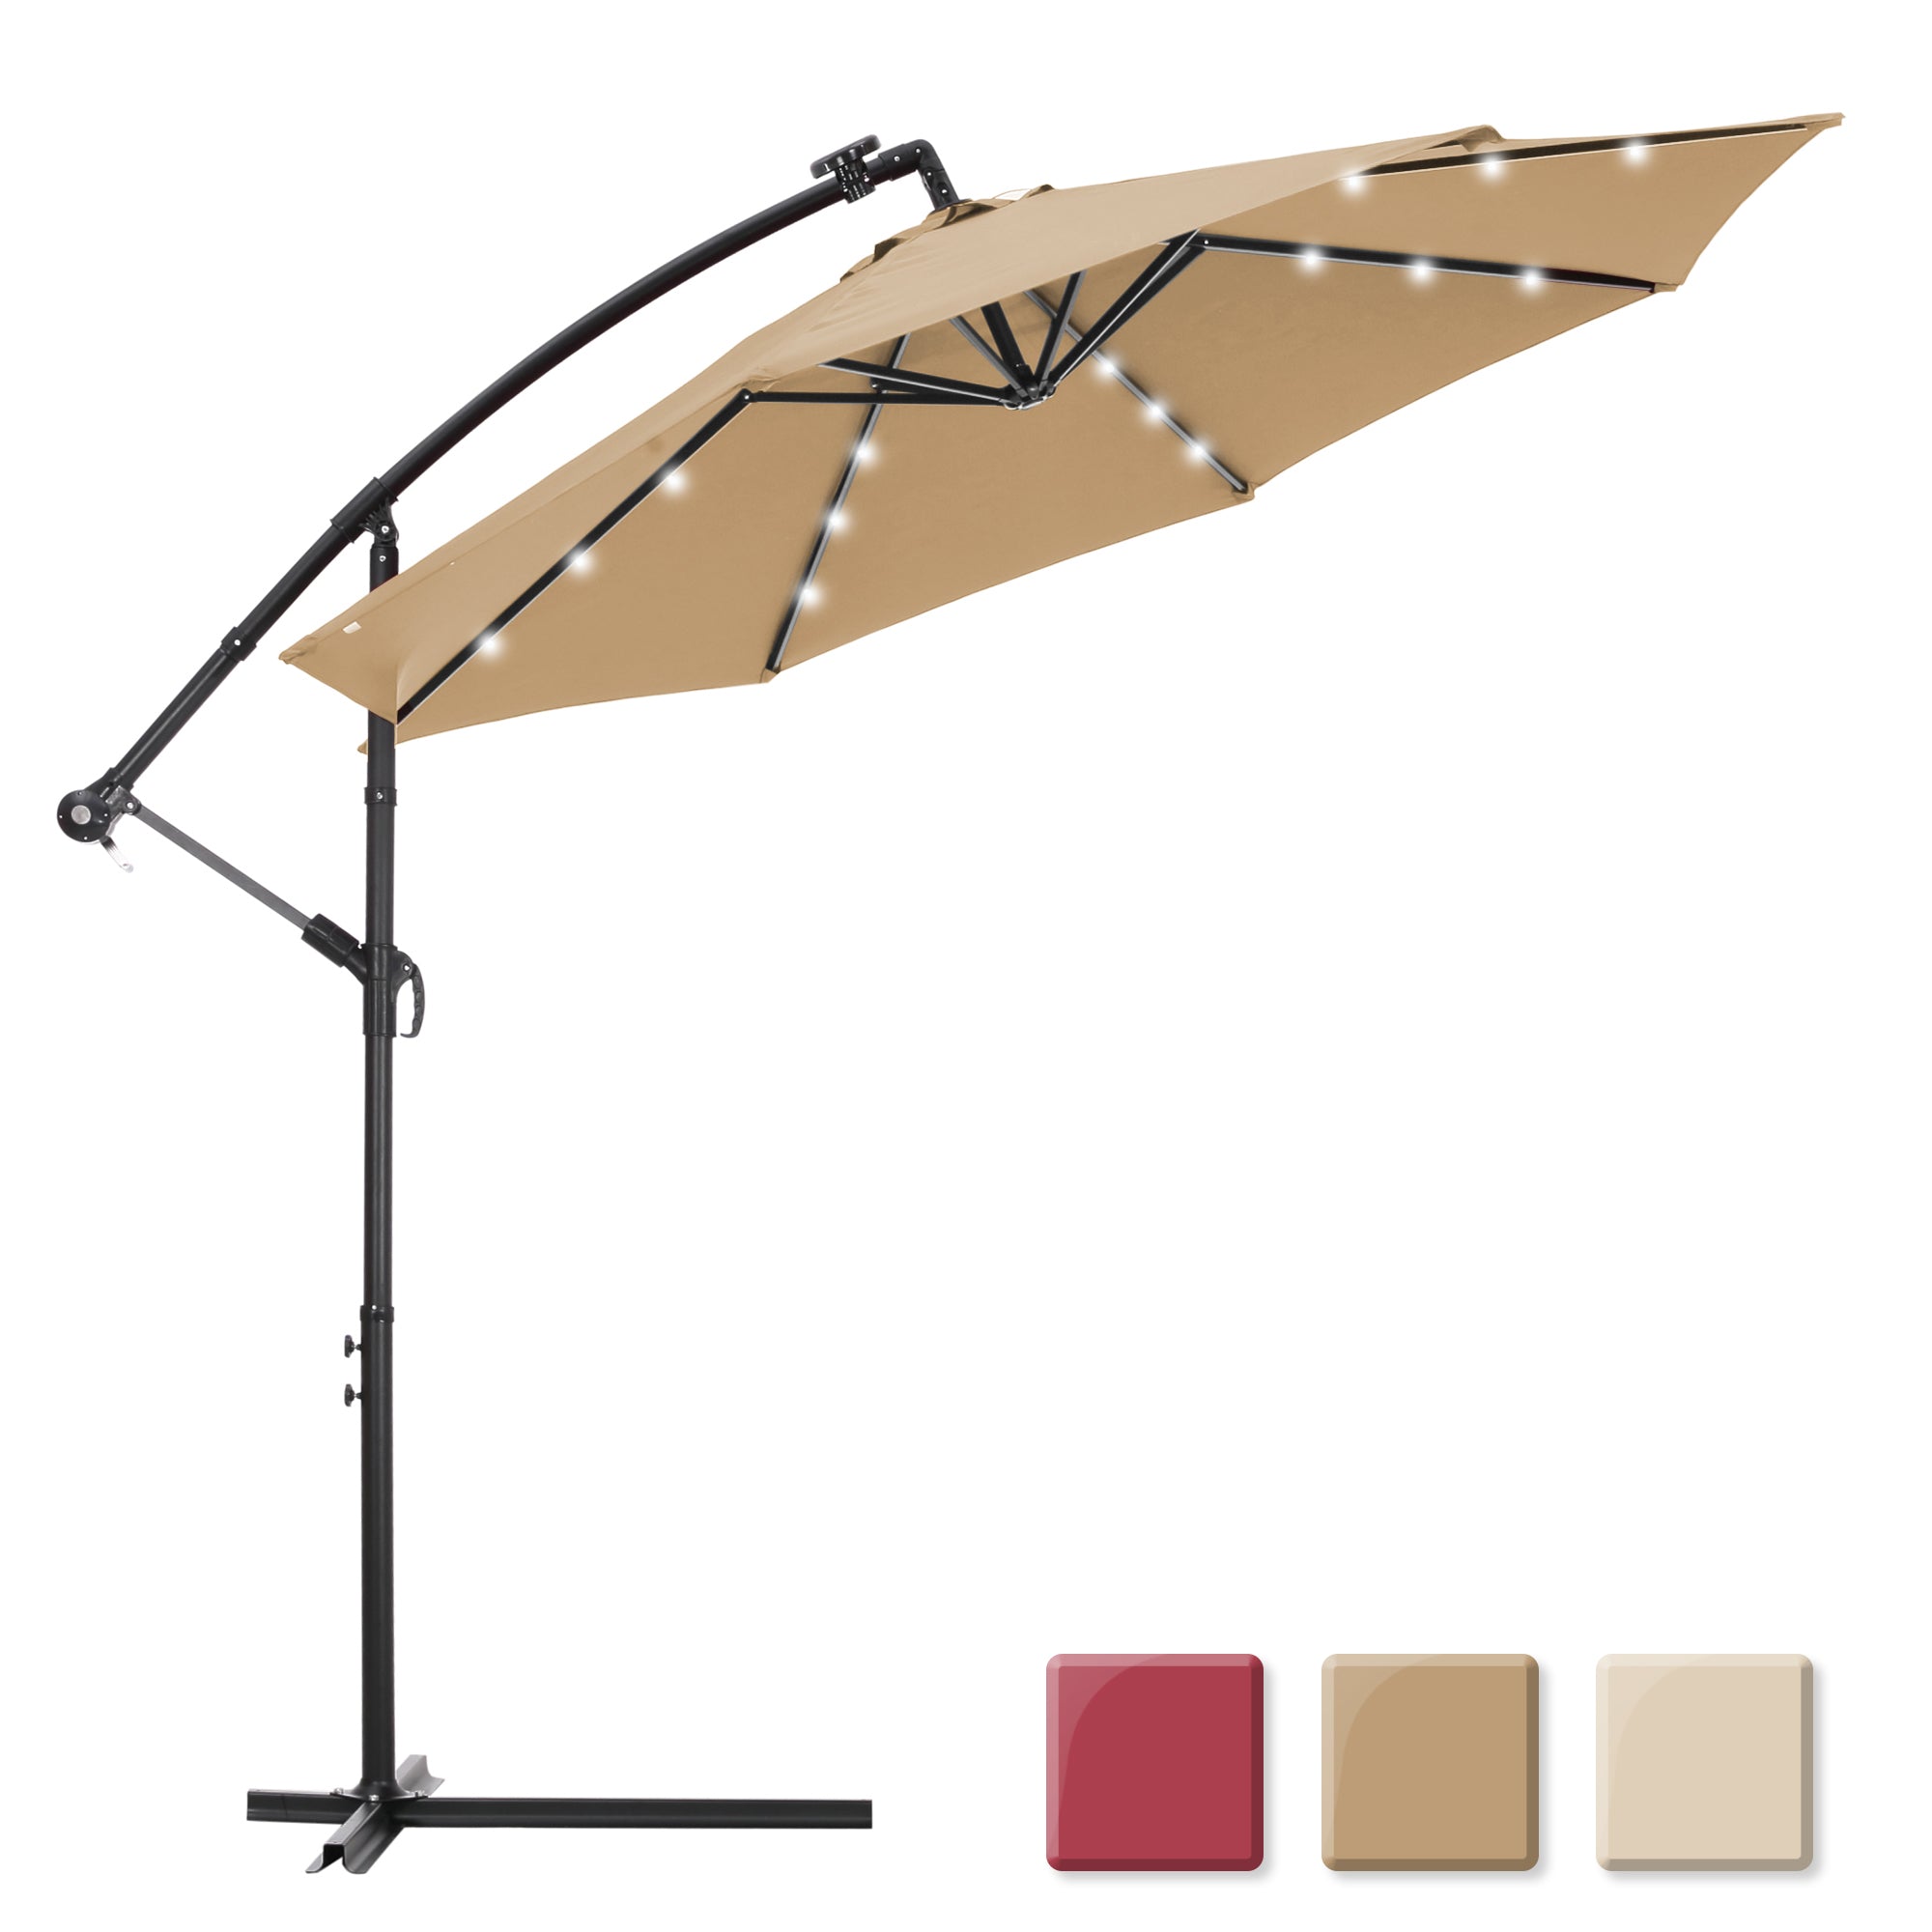 10 FT Solar LED Patio Outdoor Umbrella Hanging Cantilever Umbrella Offset Umbrella Easy Open Adustment with 24 LED Lights -taupe-Boyel Living